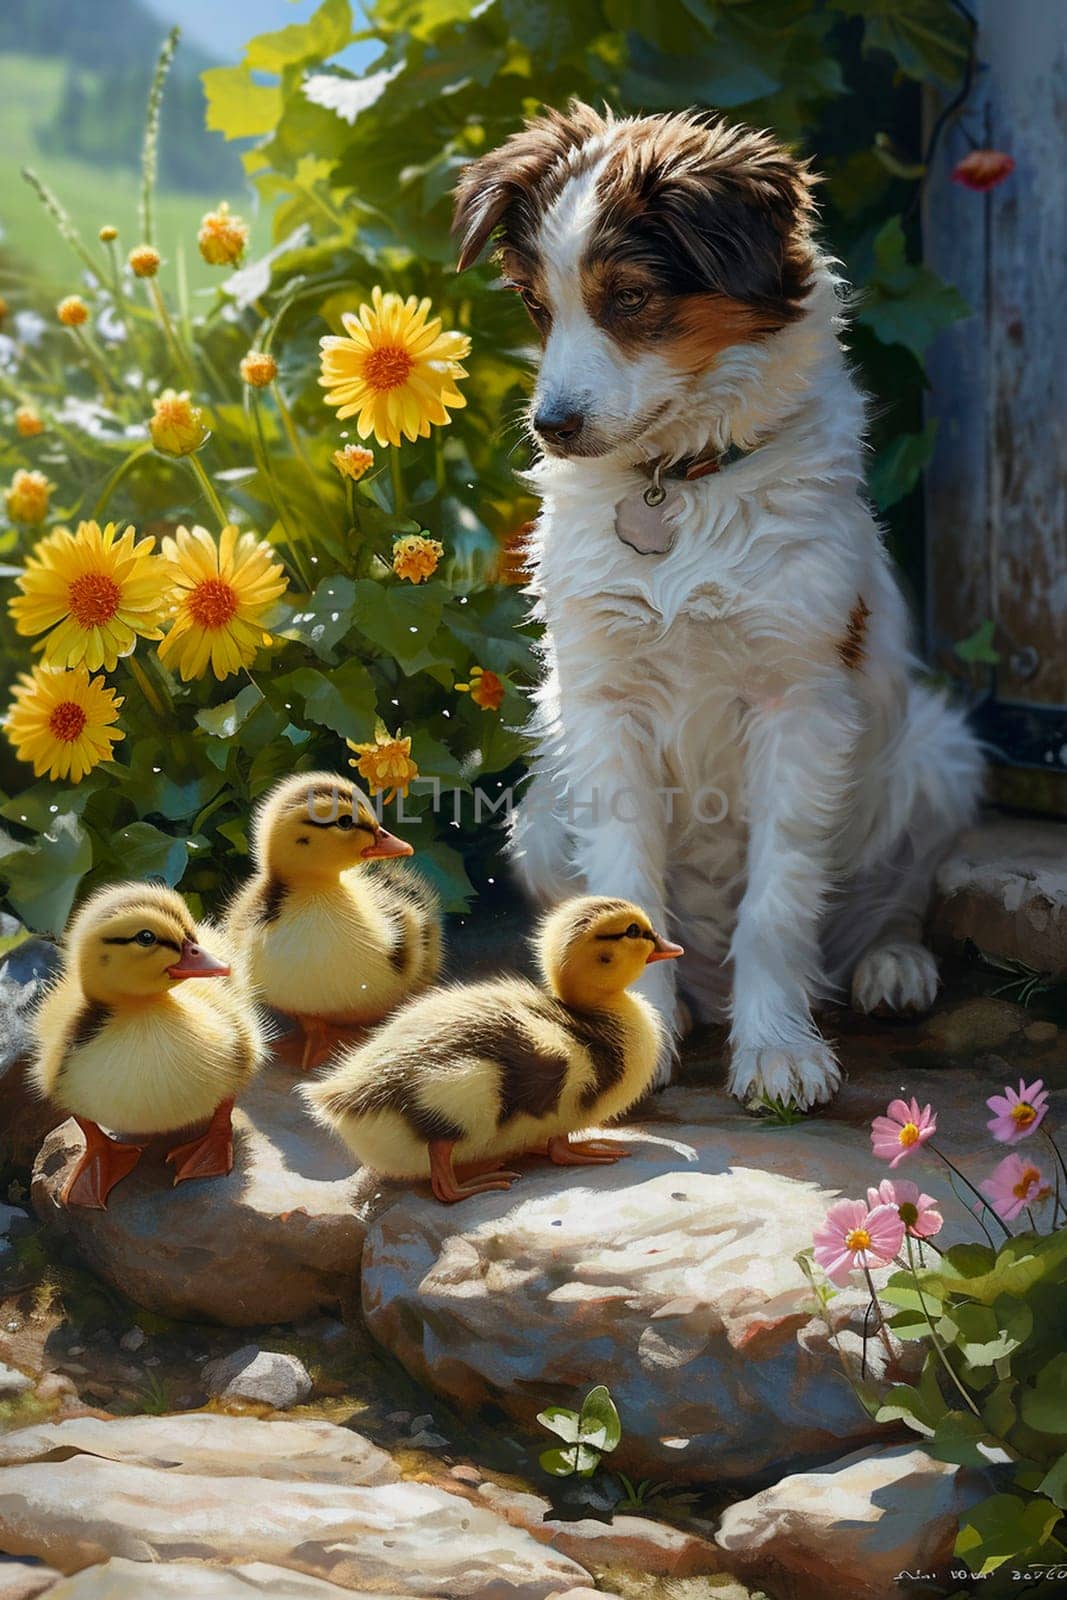 Dog with ducklings in the yard. Selective focus. by mila1784